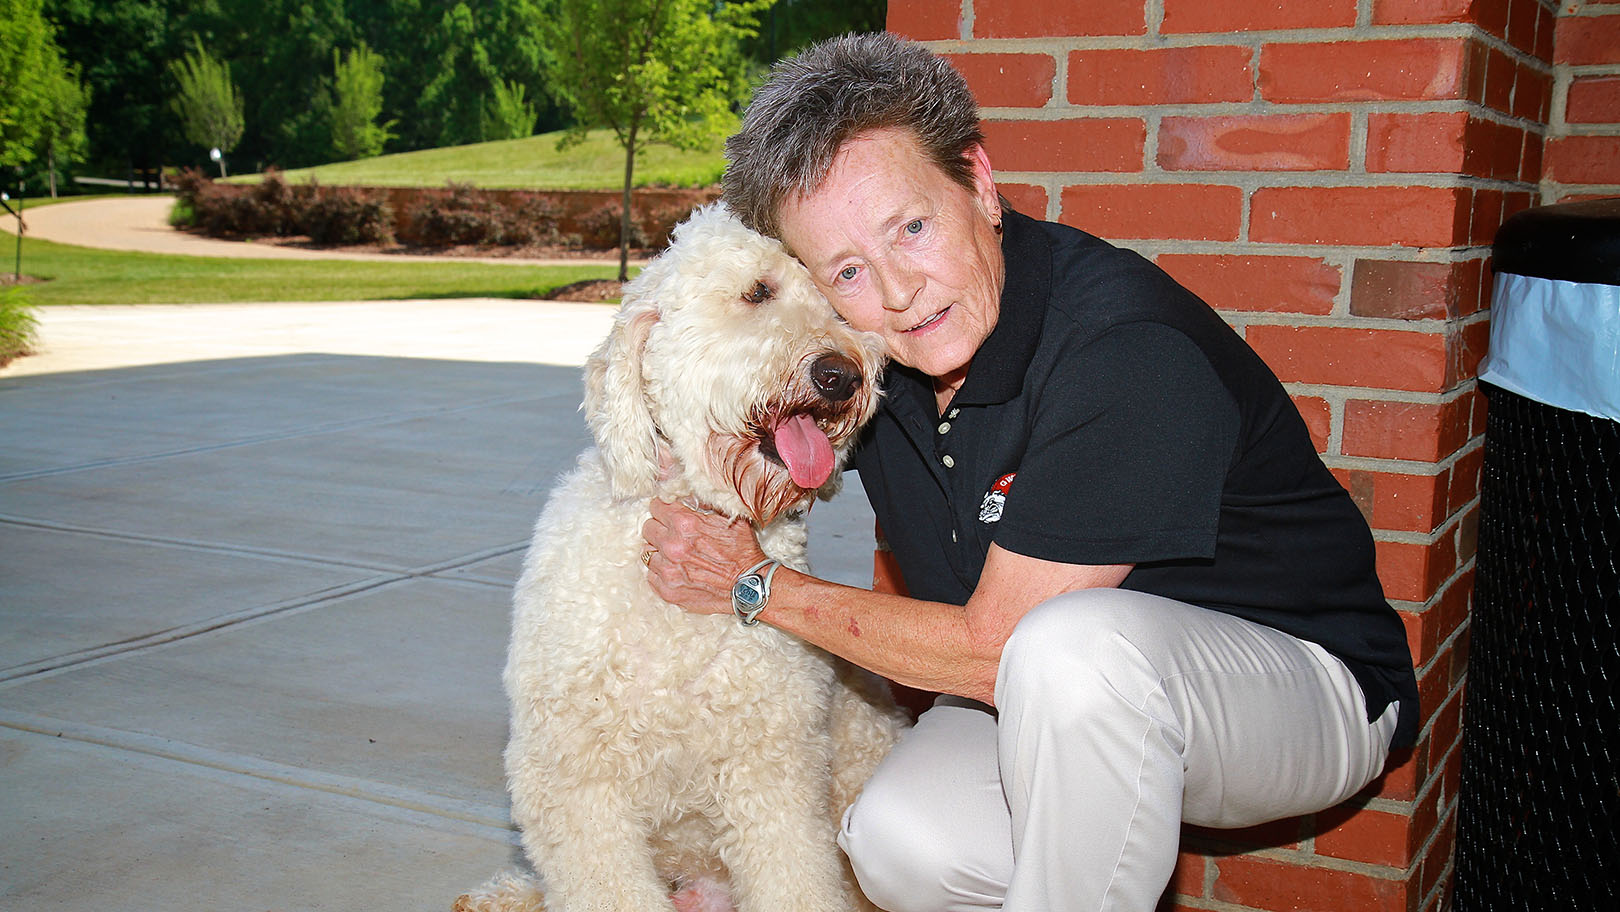 Dr. Dee Hunt on campus with dog in 2013